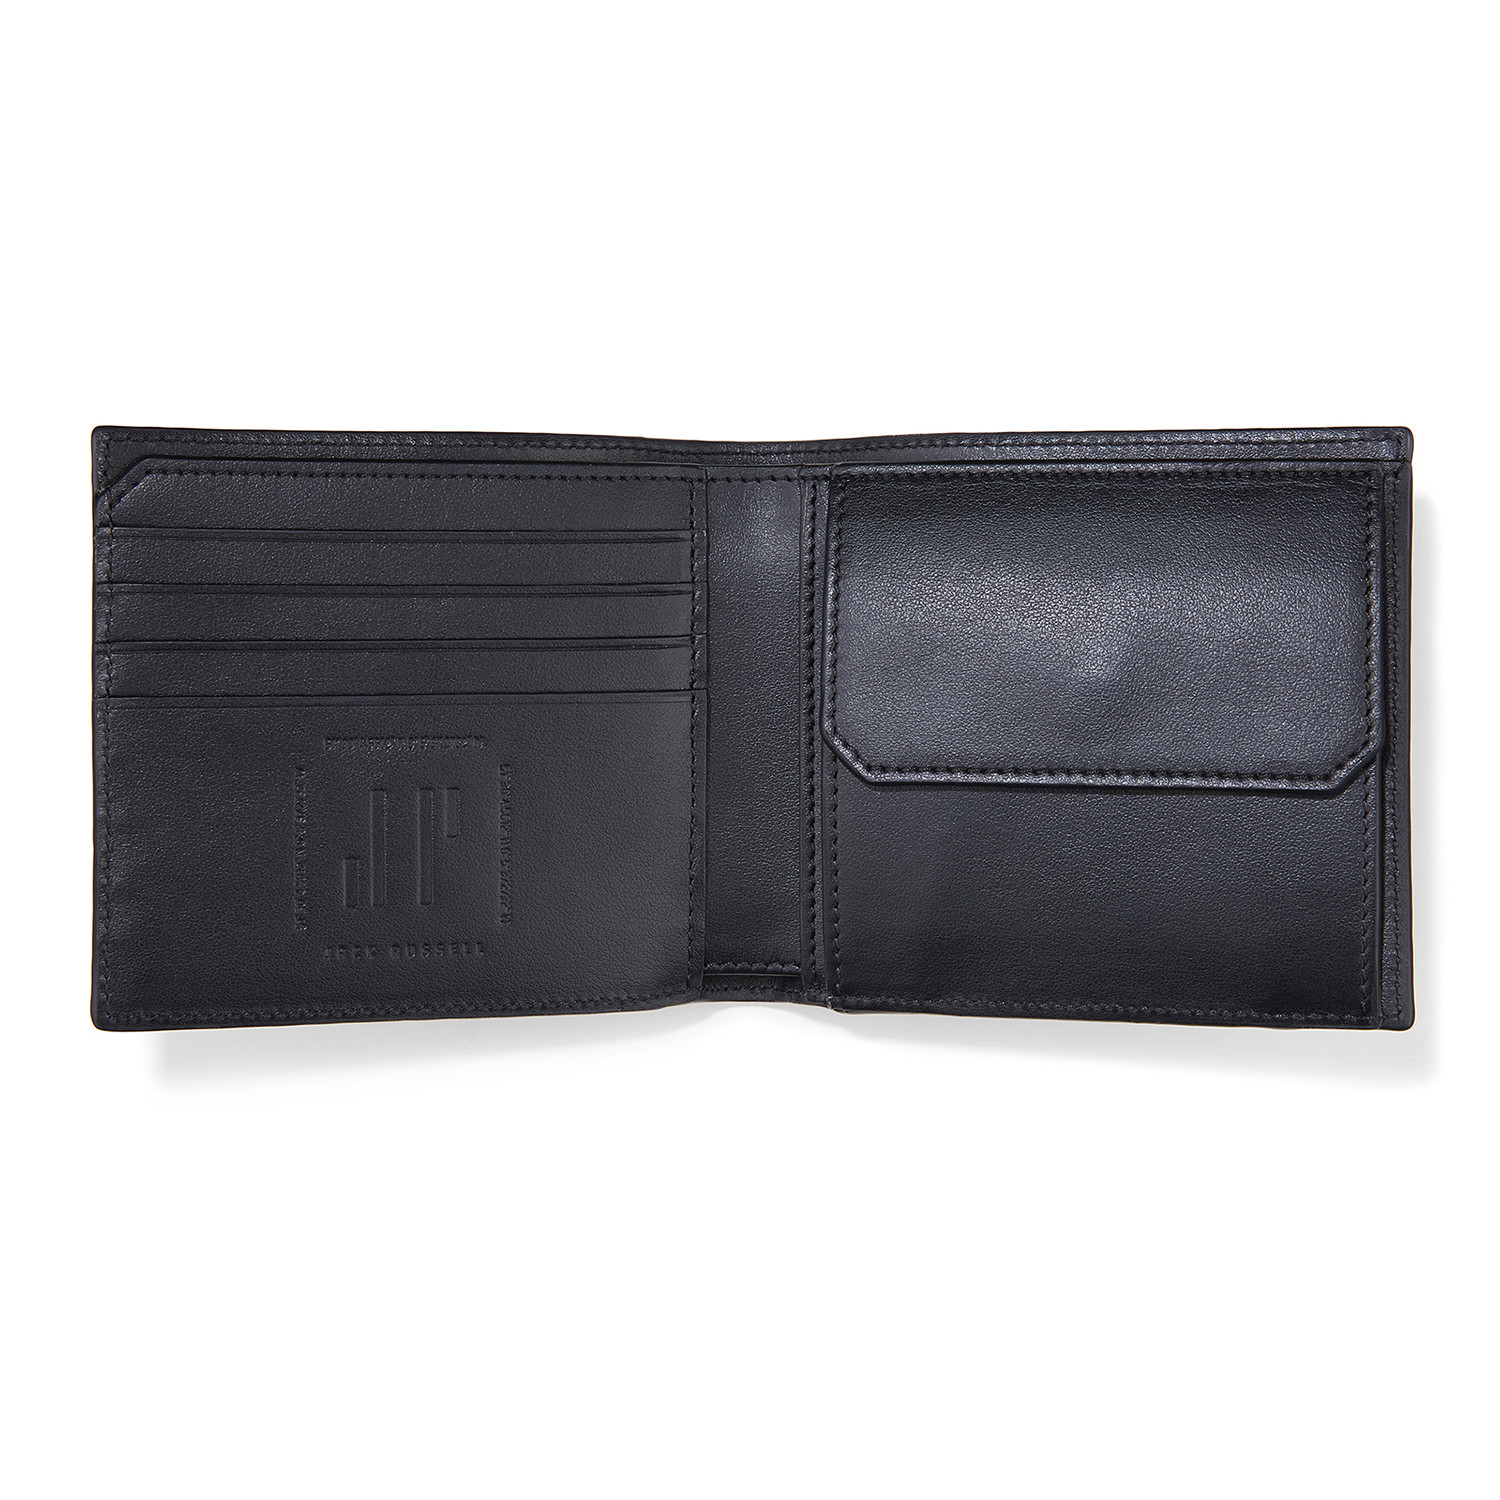 barbour wallet with coin holder